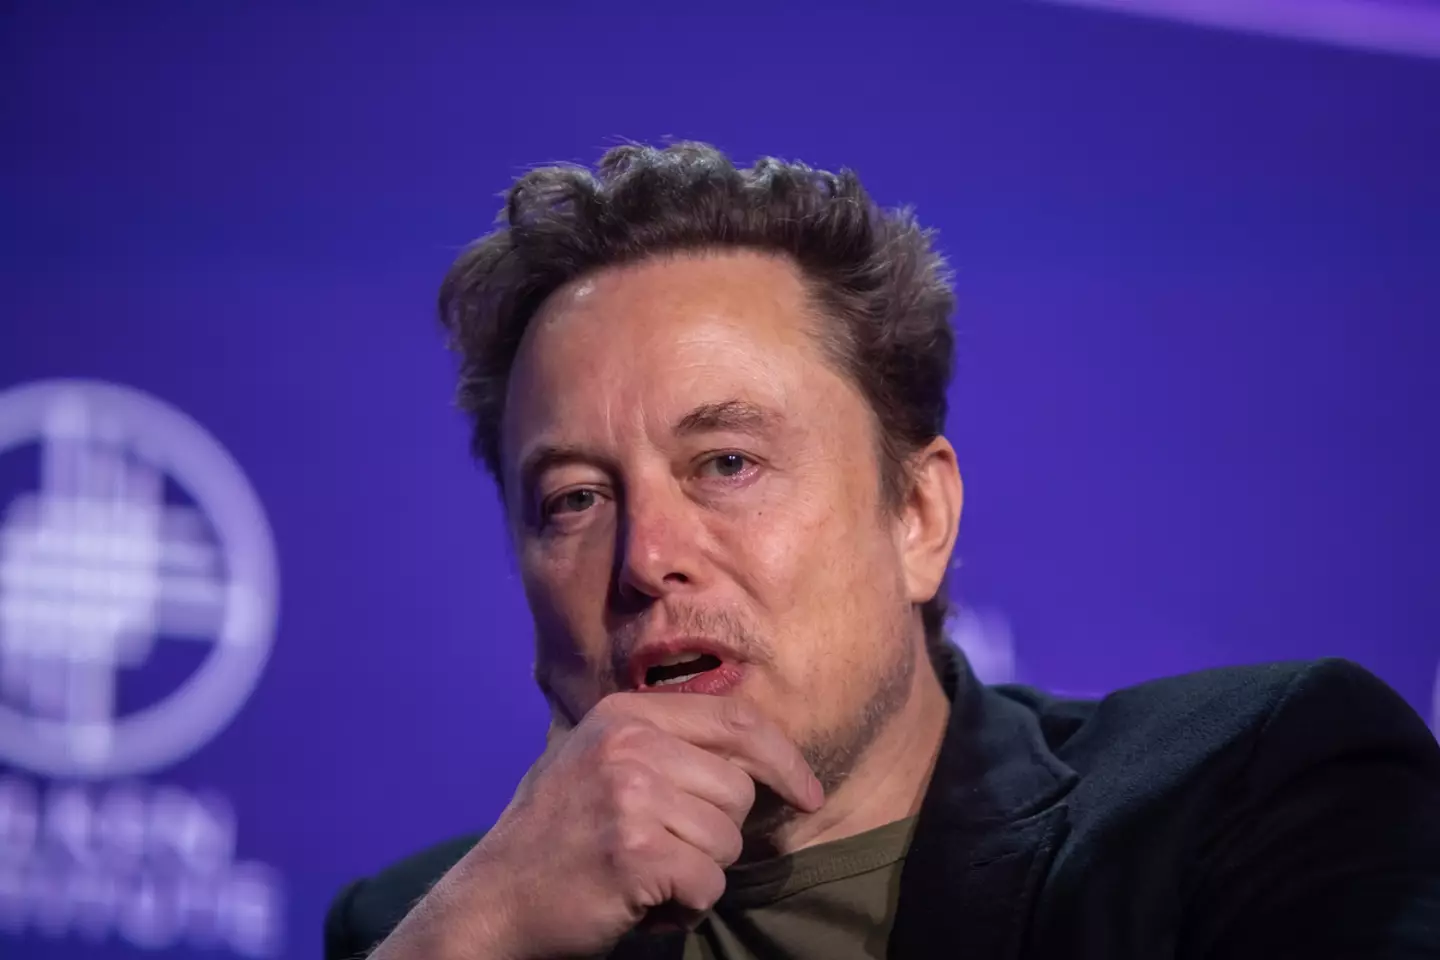 Elon Musk's Neuralink is at the forefront of futuristic technology becoming a reality. (Apu Gomes/Getty Images)